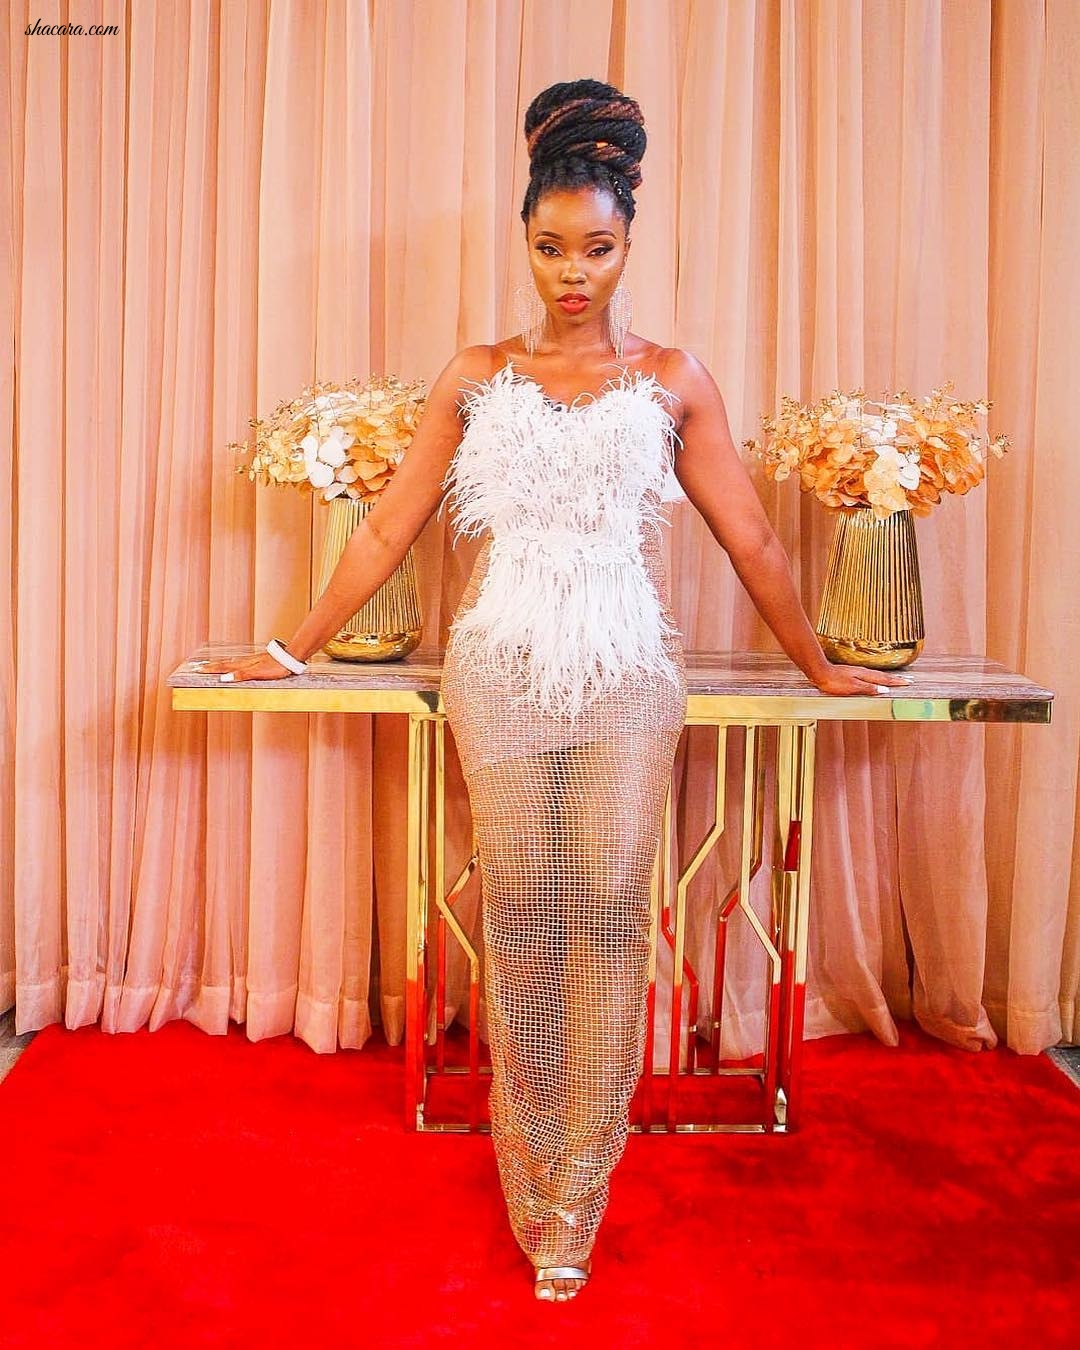 These Ex-Housemates Came To Slay! Our Favorite Looks From The BBNaija Reunion